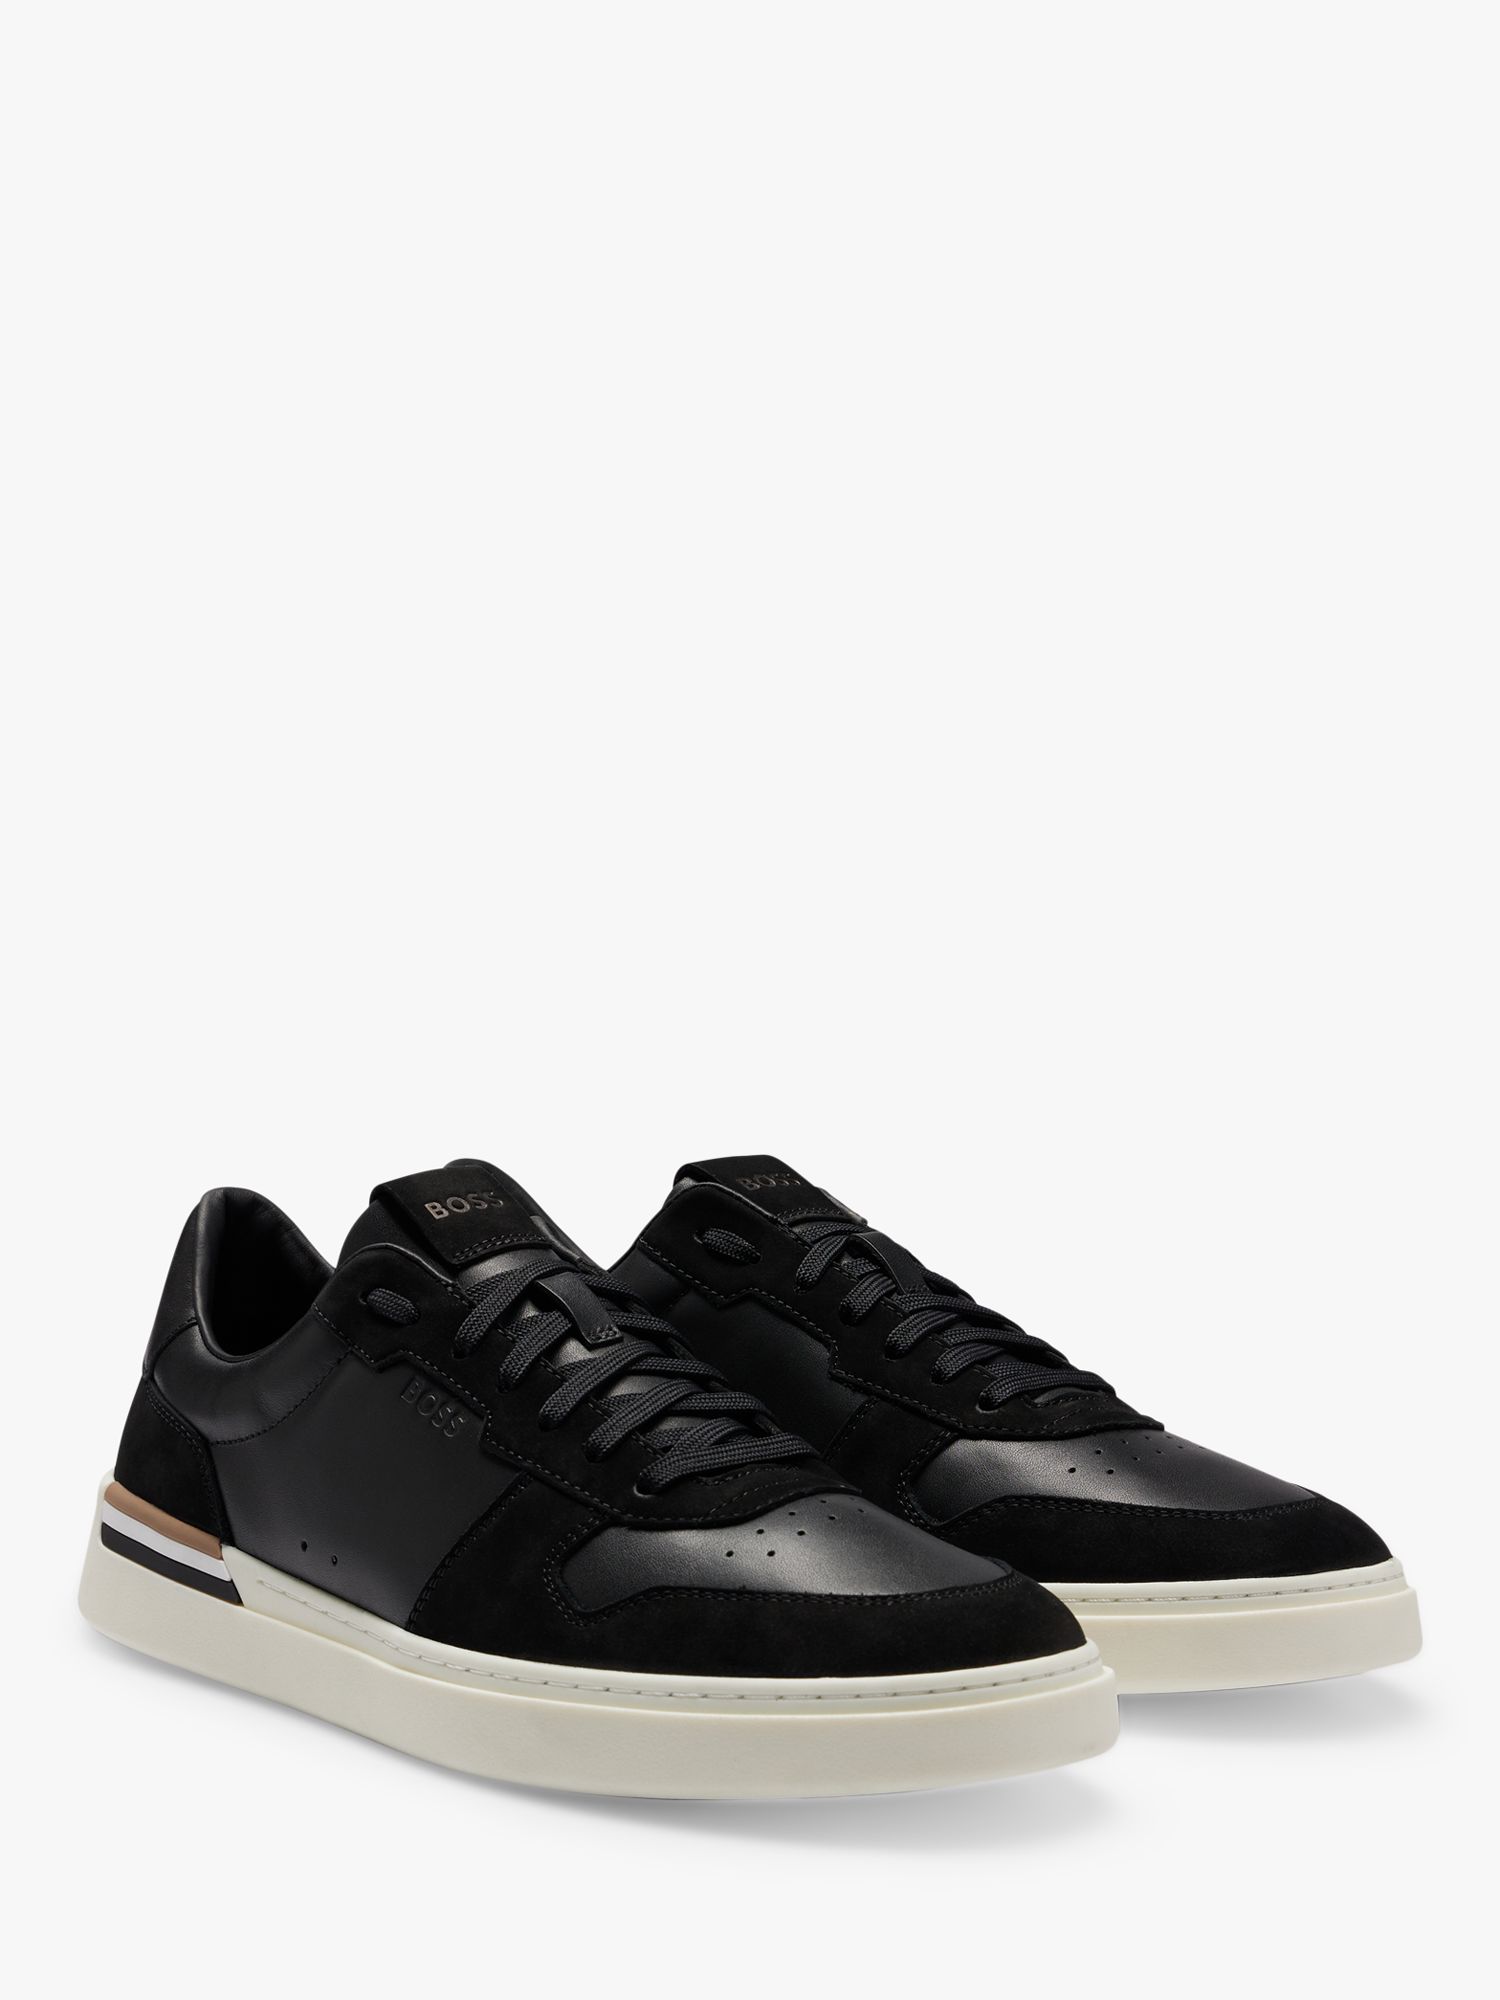 Buy BOSS Clint Basic Trainers, Black Online at johnlewis.com